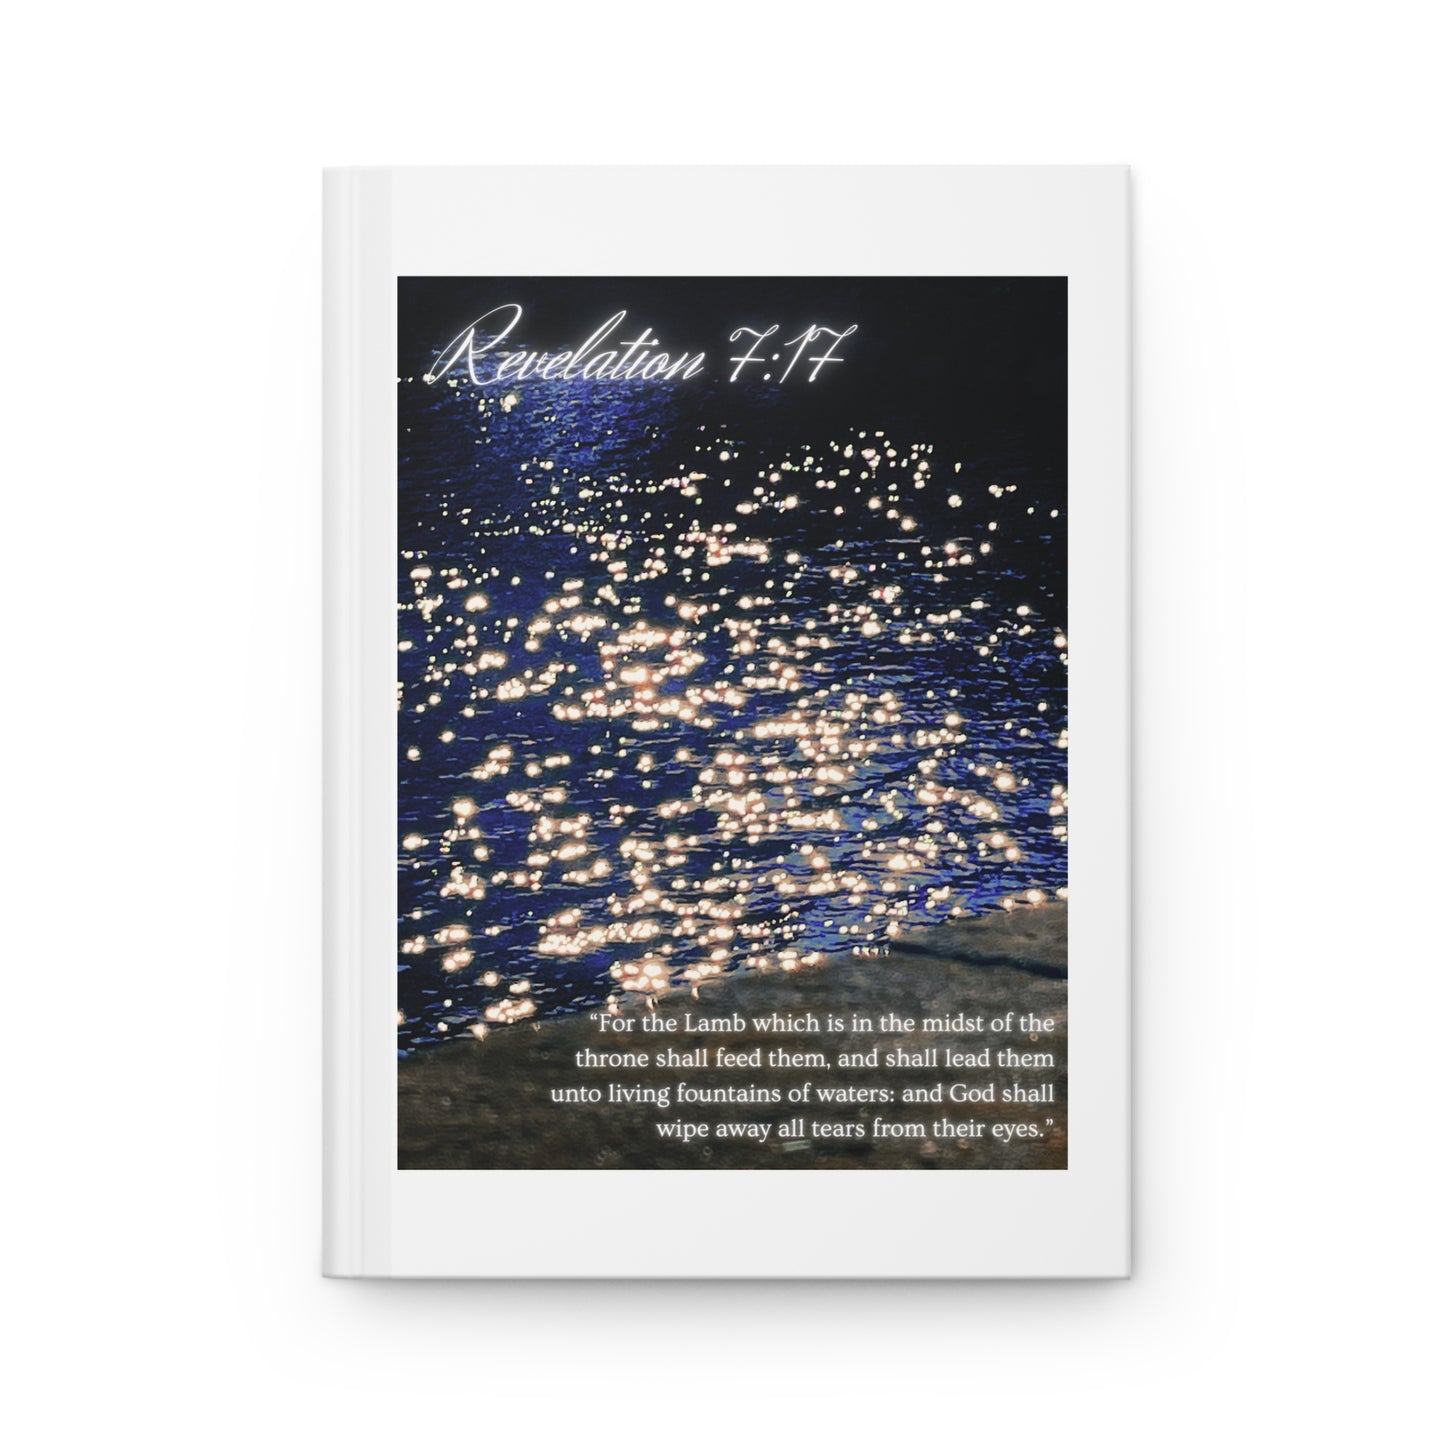 "LEAD THEM UNTO LIVING FOUNTAINS OF WATERS", Hardcover Journal, Revelation 7:17 Candle Lumination Kingdom Print